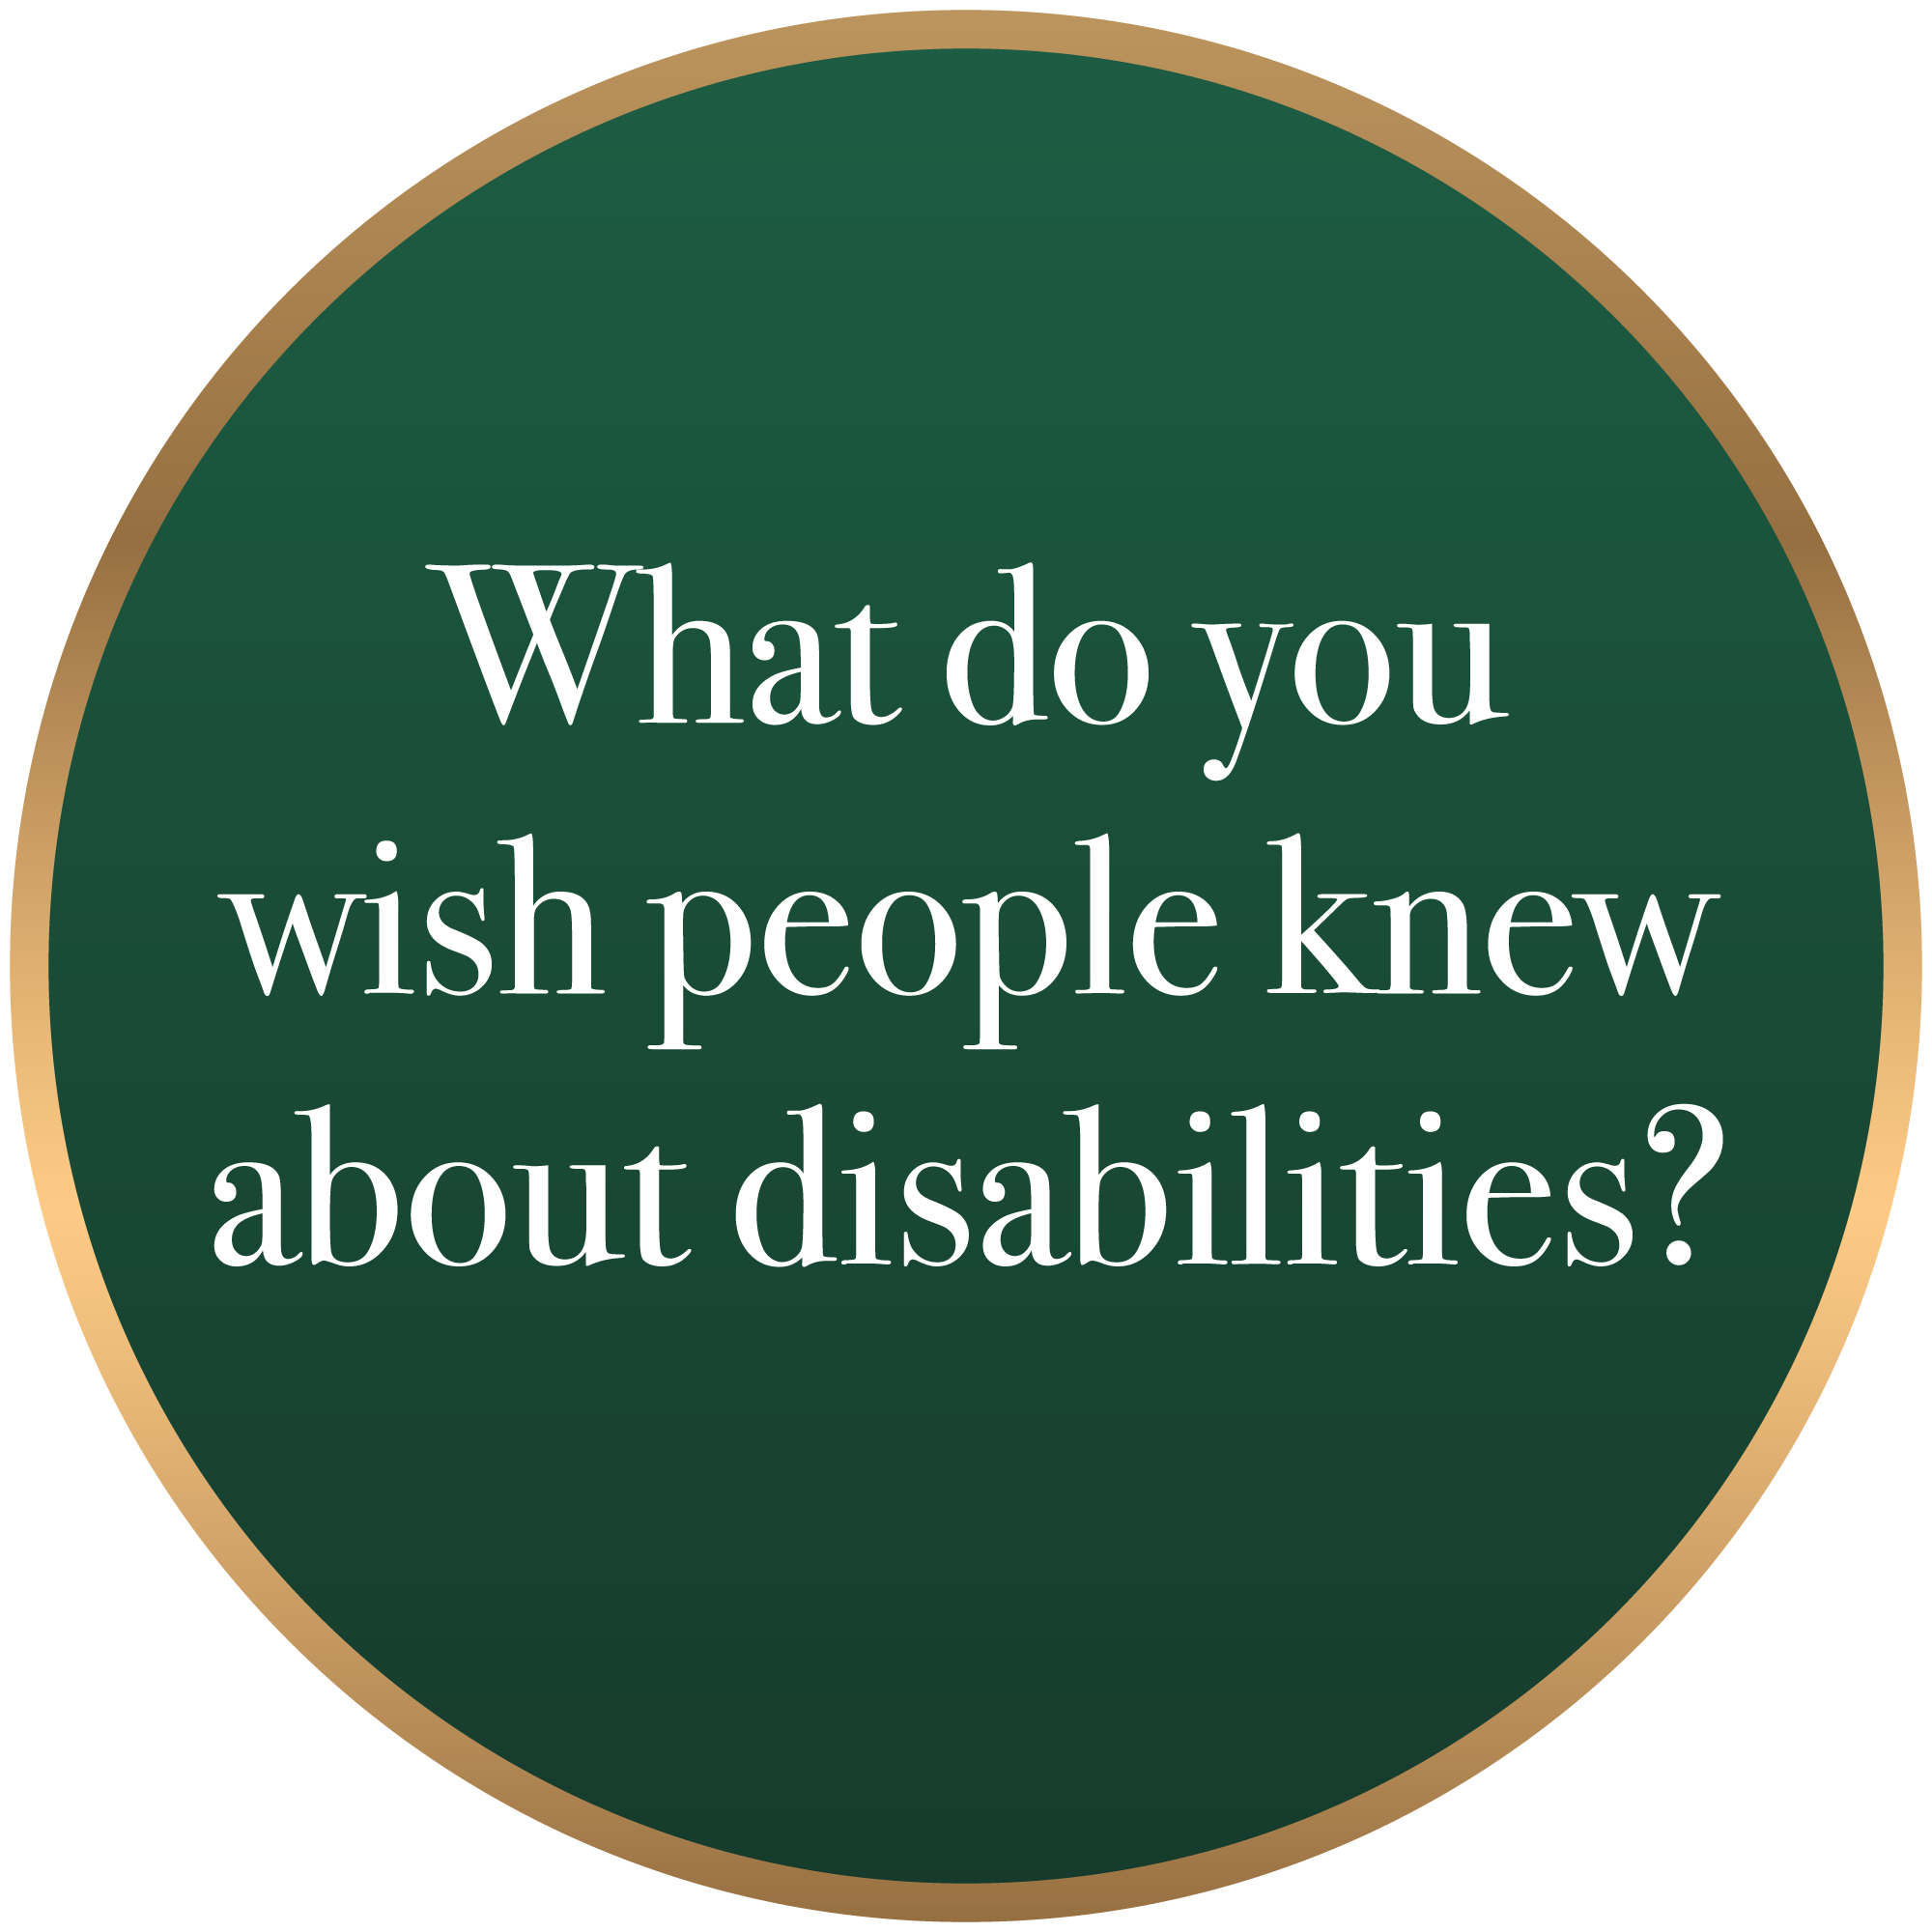 What do you wish people knew about disabilities?